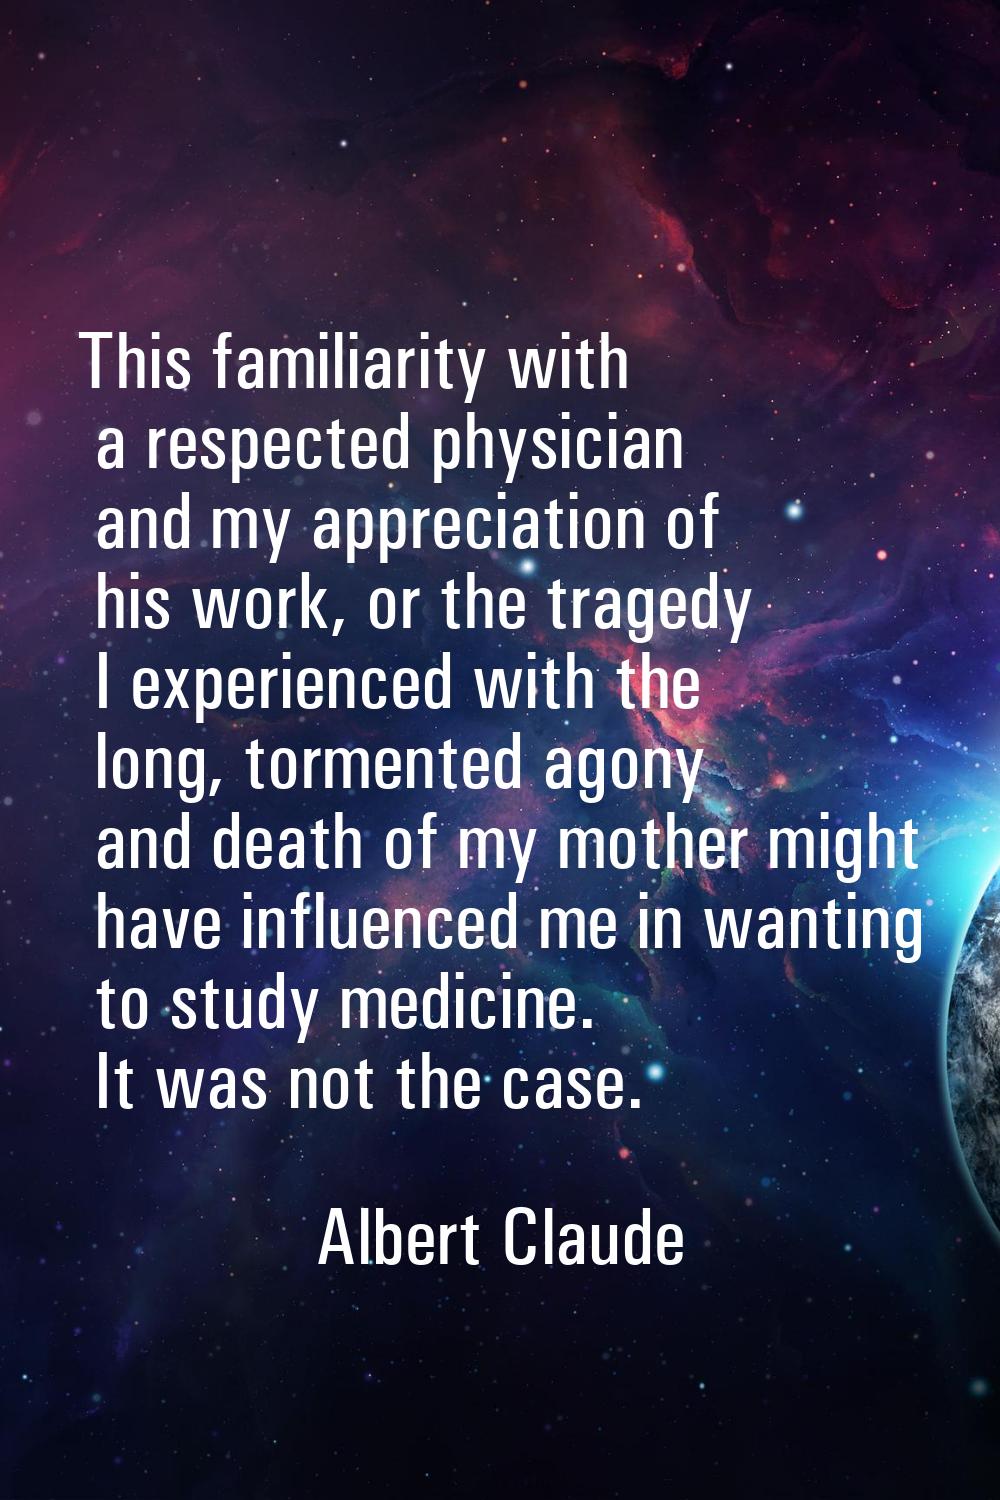 This familiarity with a respected physician and my appreciation of his work, or the tragedy I exper